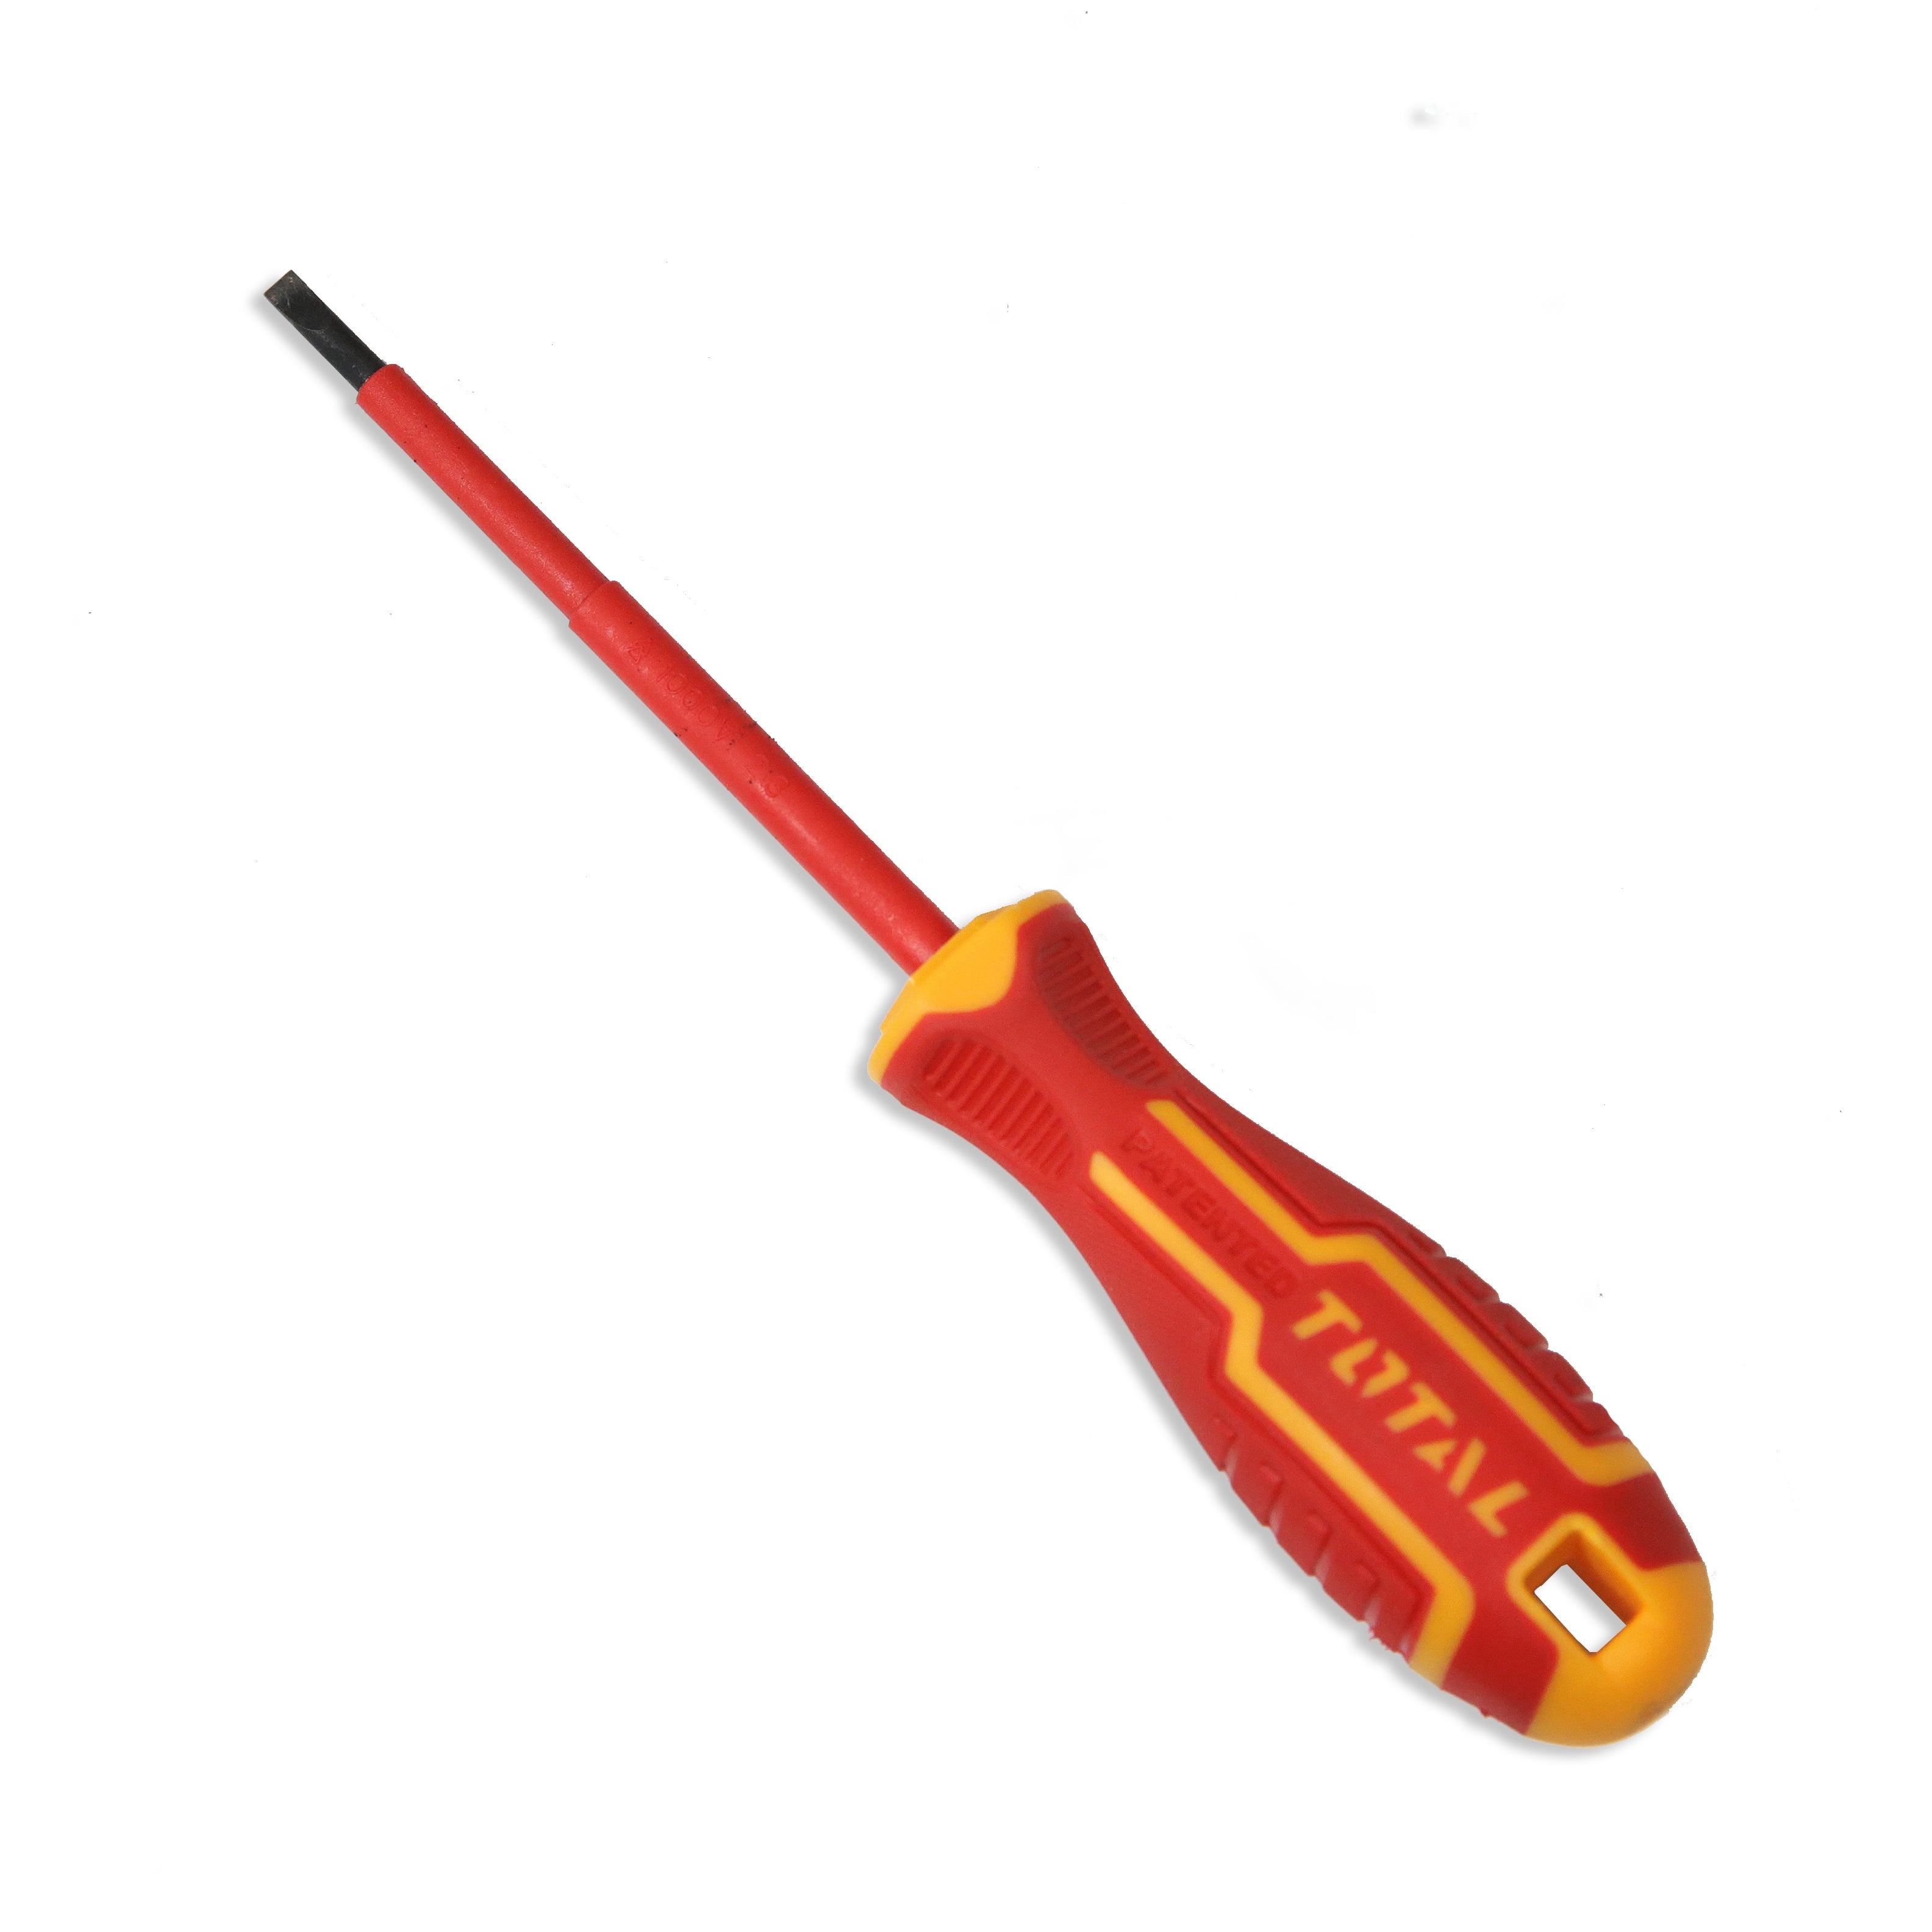 Total Insulated Screwdriver SL4.0 x 100mm THTIS4100